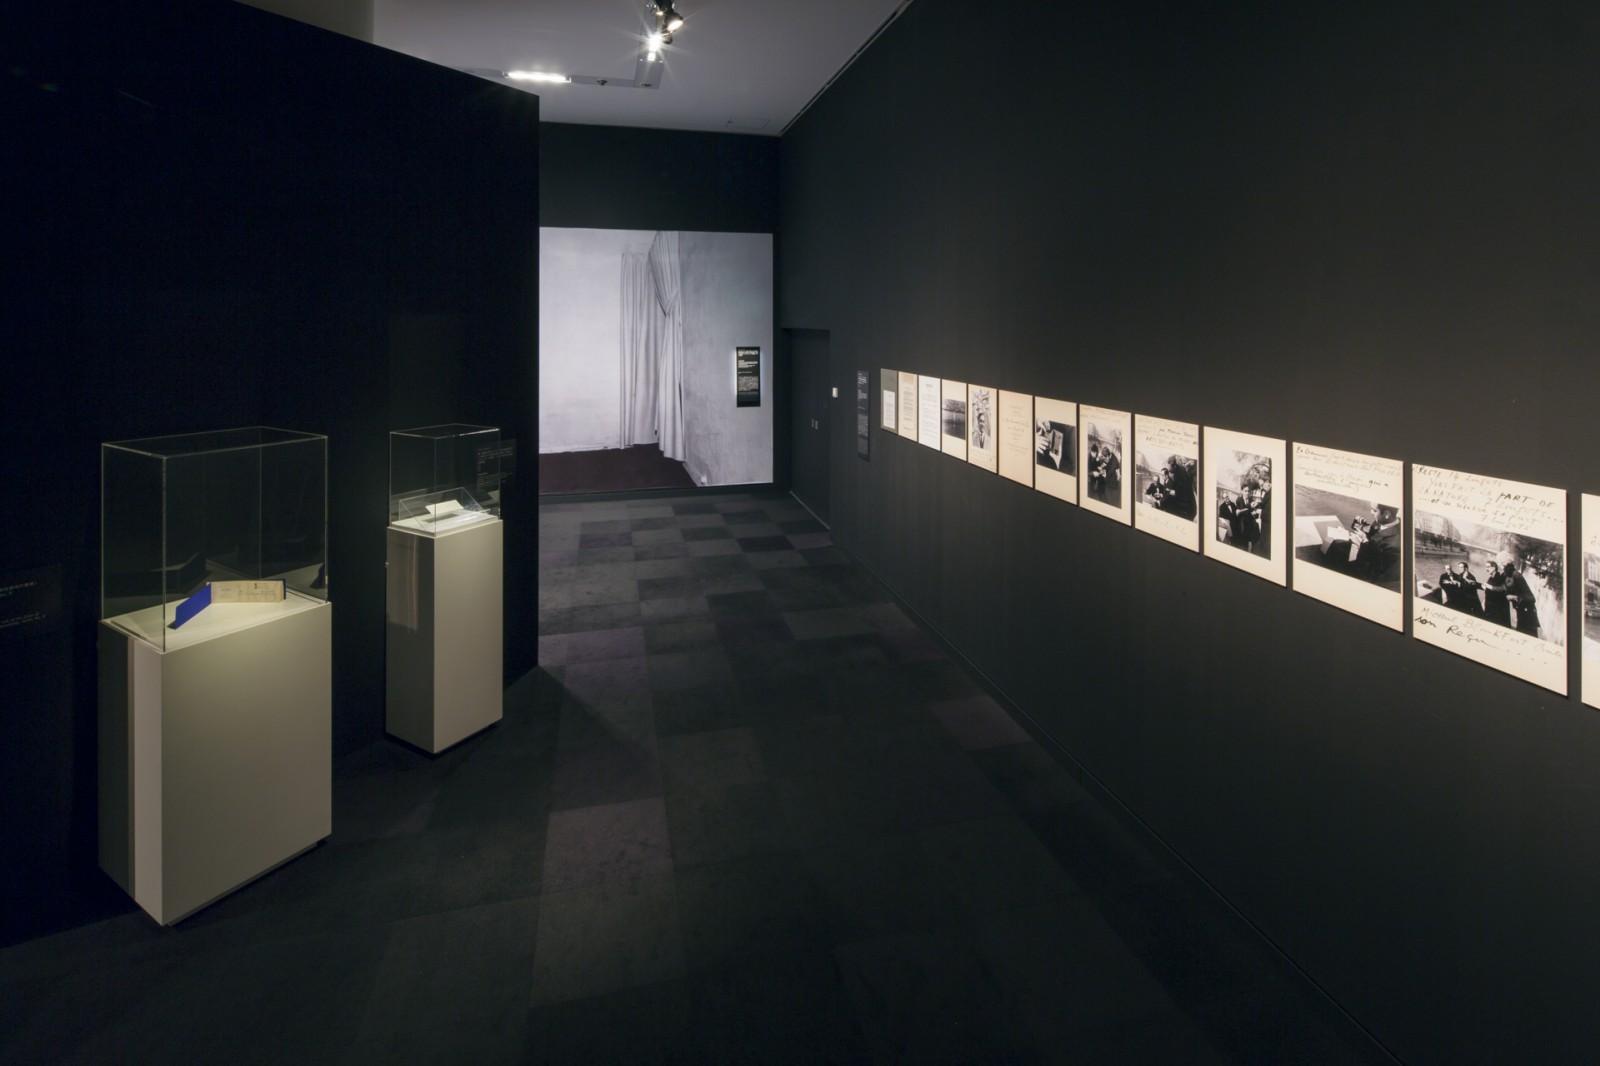 View of the exhibition "Lee Mingwei and His Relations : The Art of Participation", Mori Art Museum, 2014